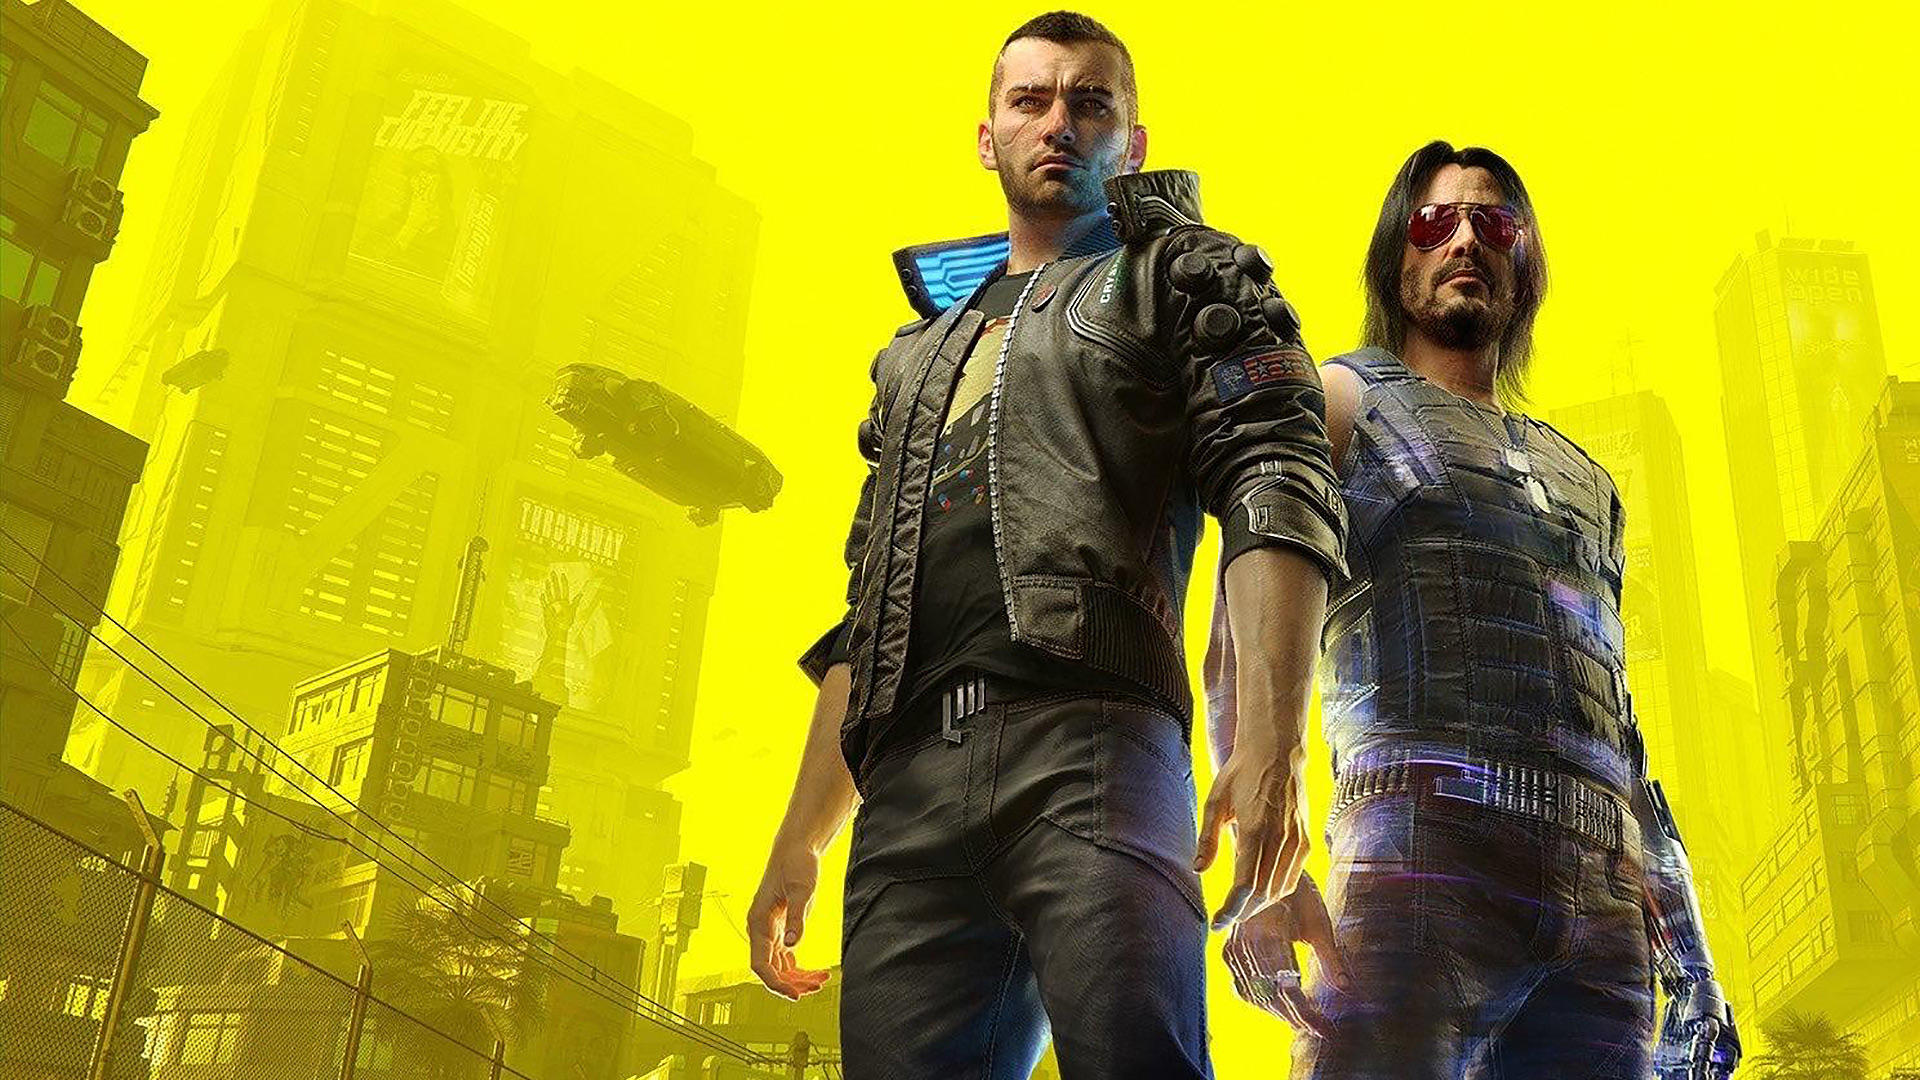 CD Projekt Red Promises To Continue Updating Cyberpunk 2077, With Two Large Patches Arriving In January And February